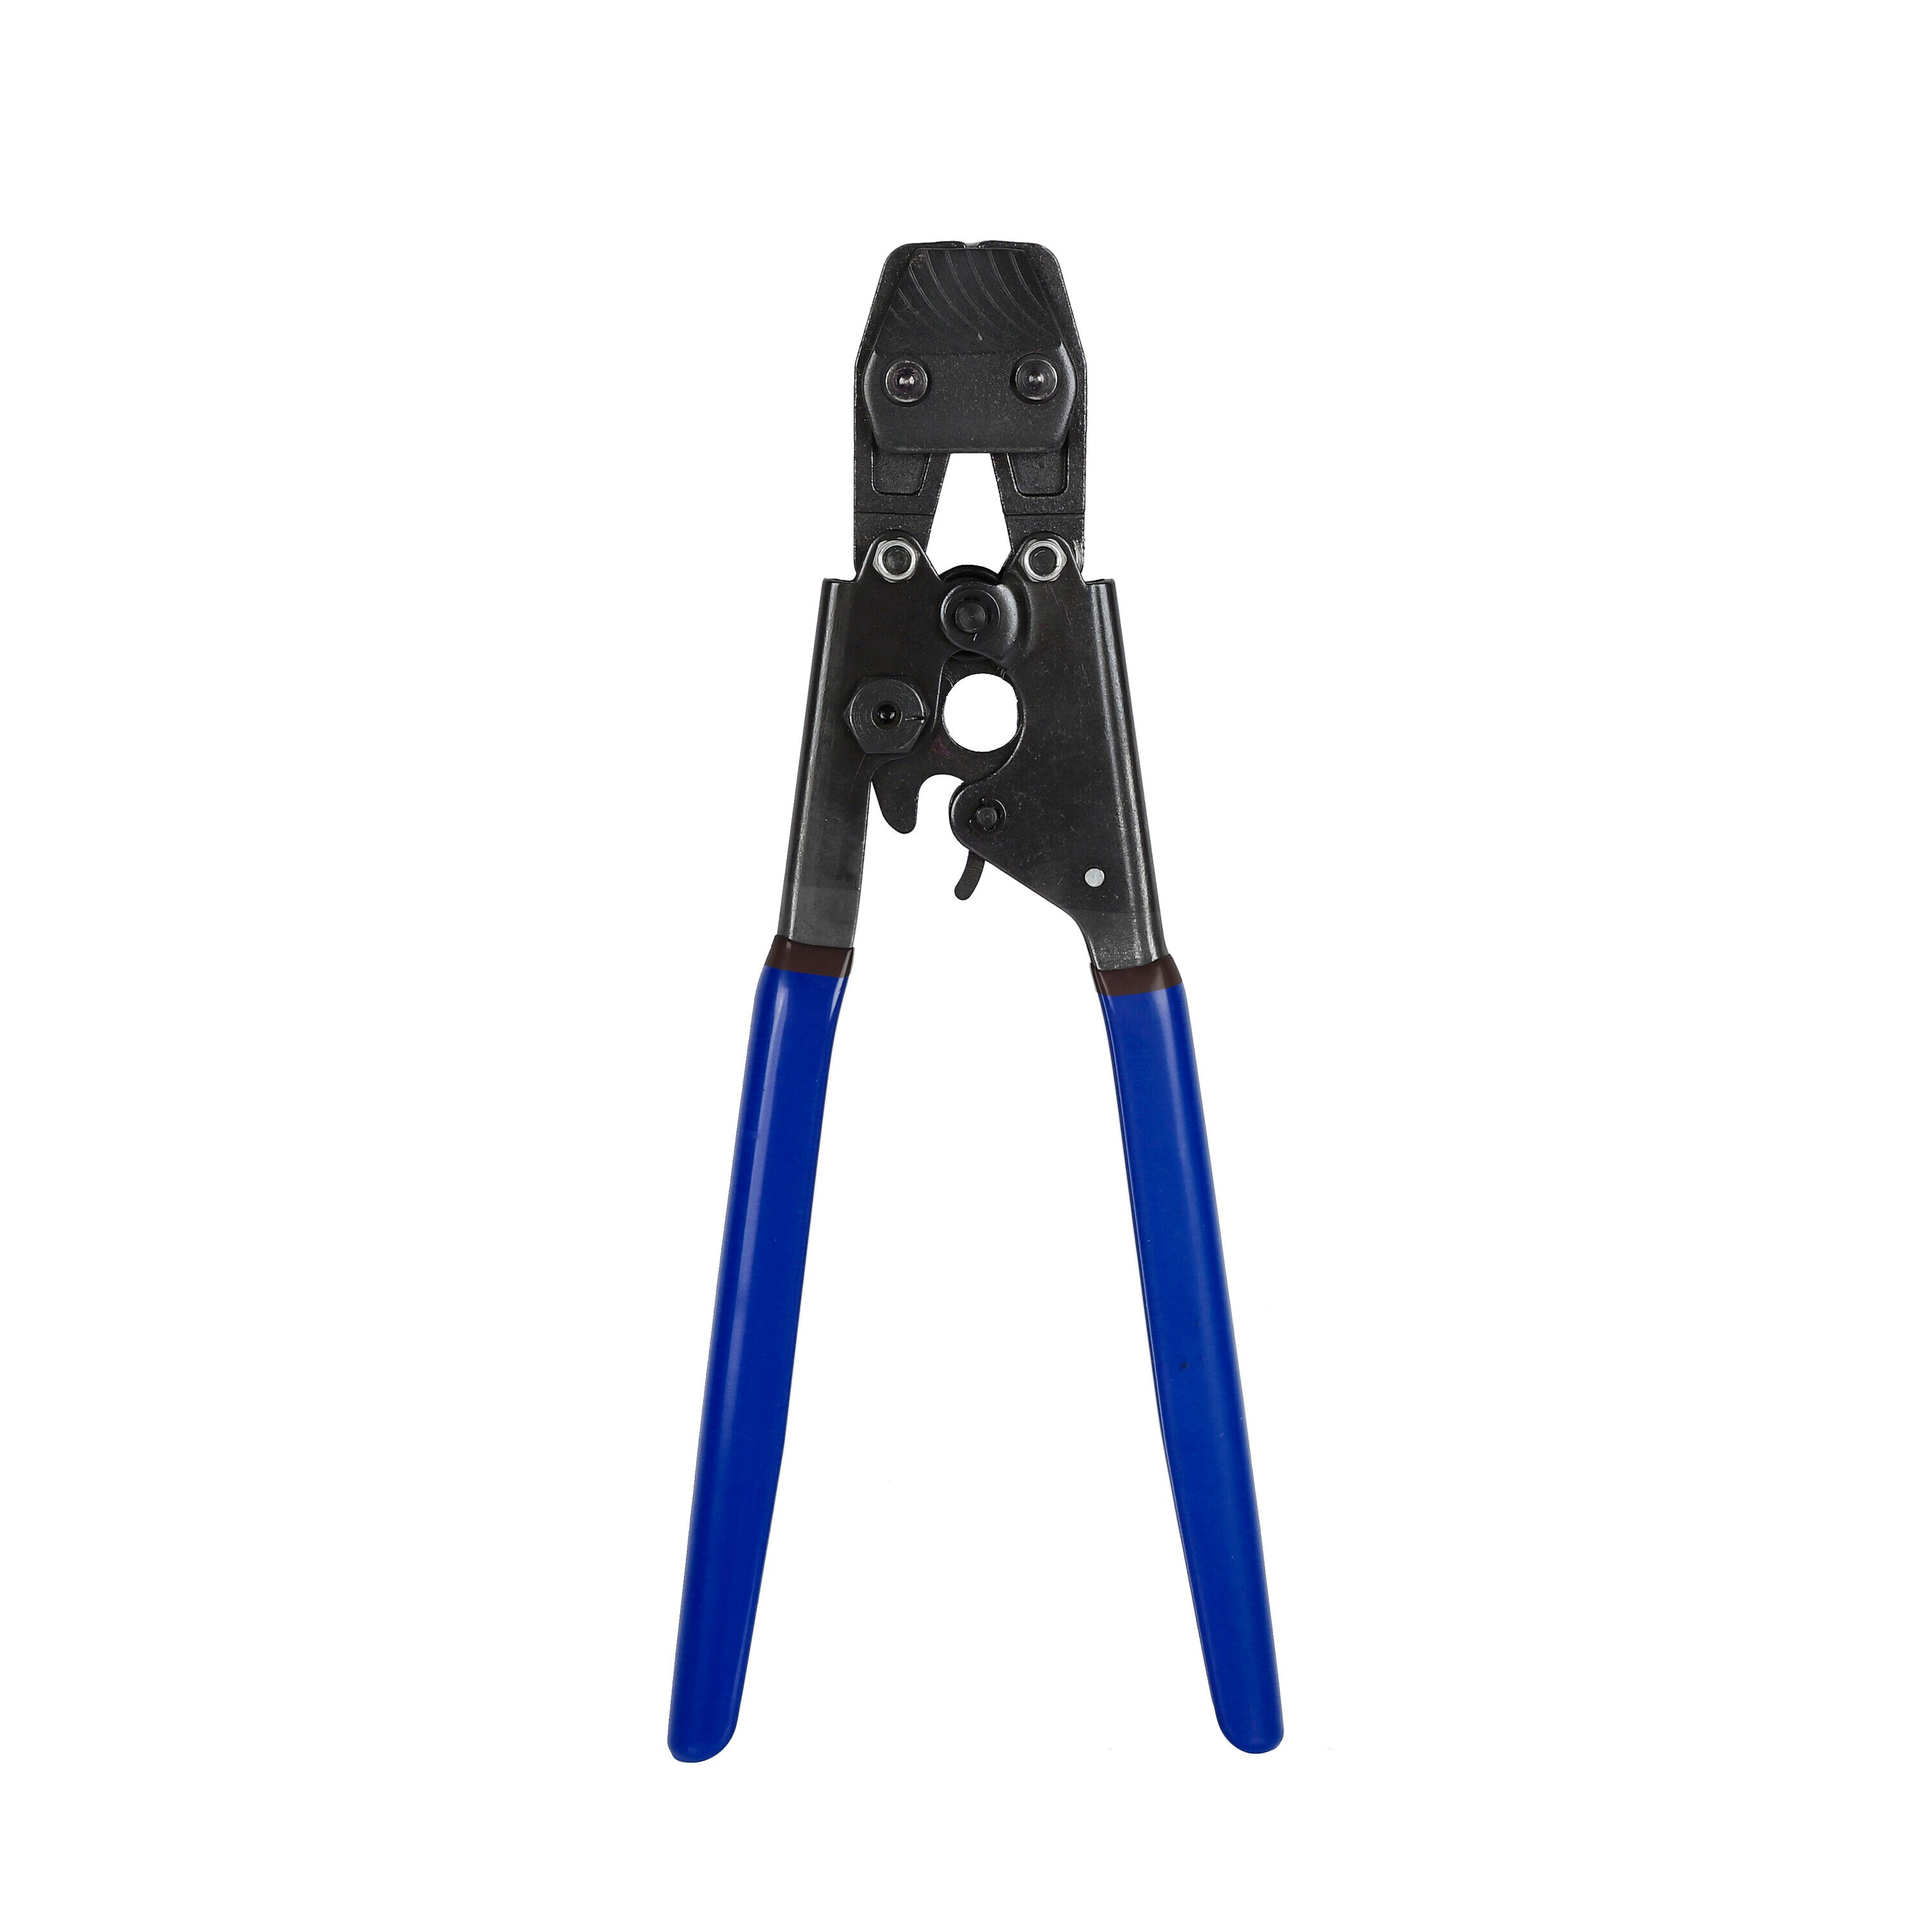 Kobalt Cinch the clamp 3/8-in To 1-in Aluminum Pipe Wrench in the Plumbing Wrenches and Specialty Tools department at Lowes